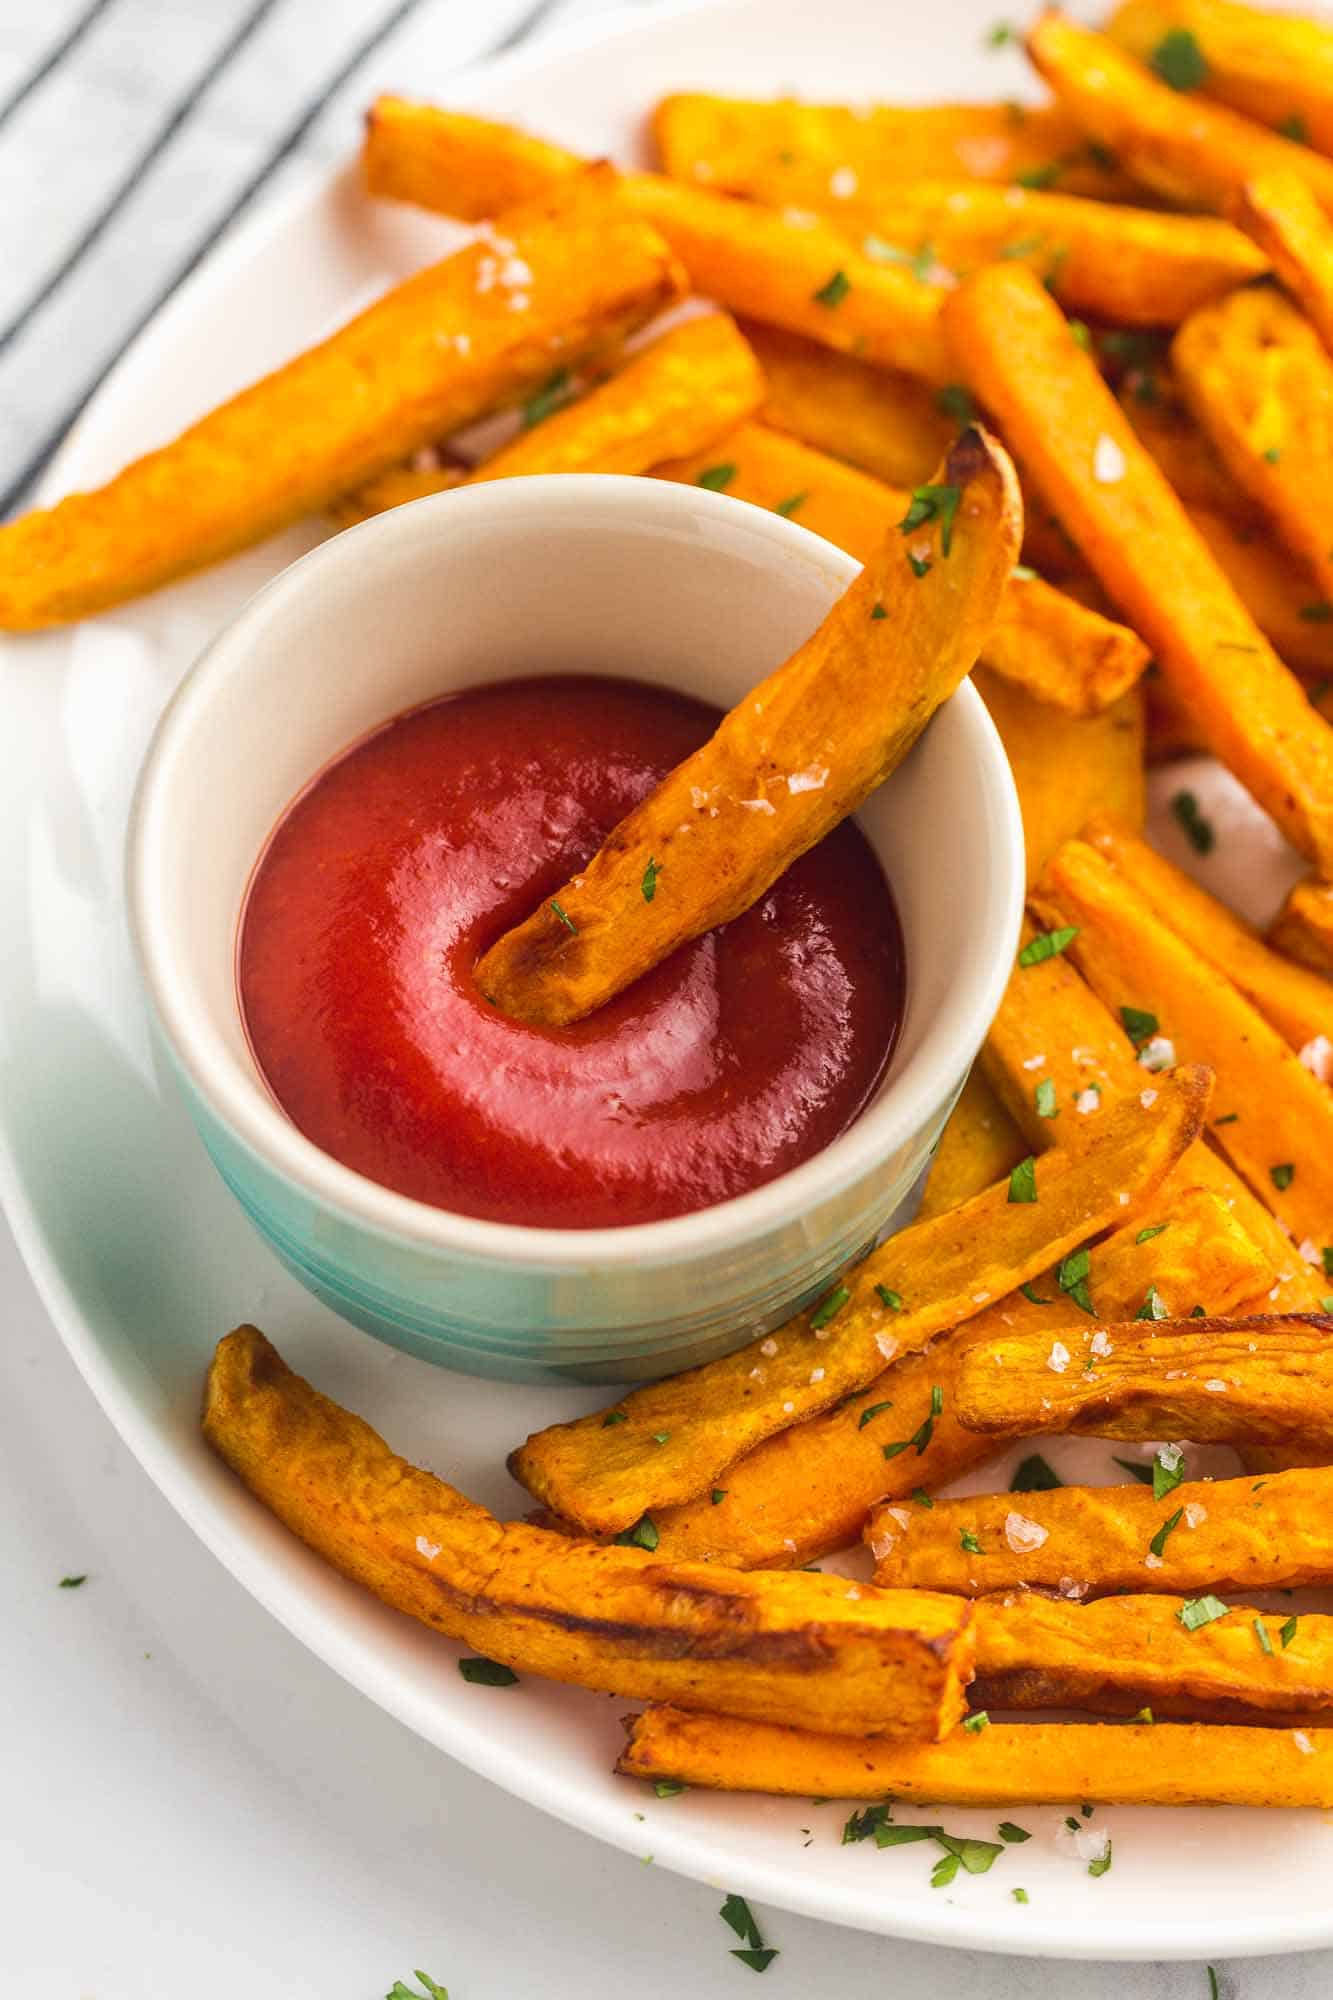 Sweet potato fries dipped in ketchup